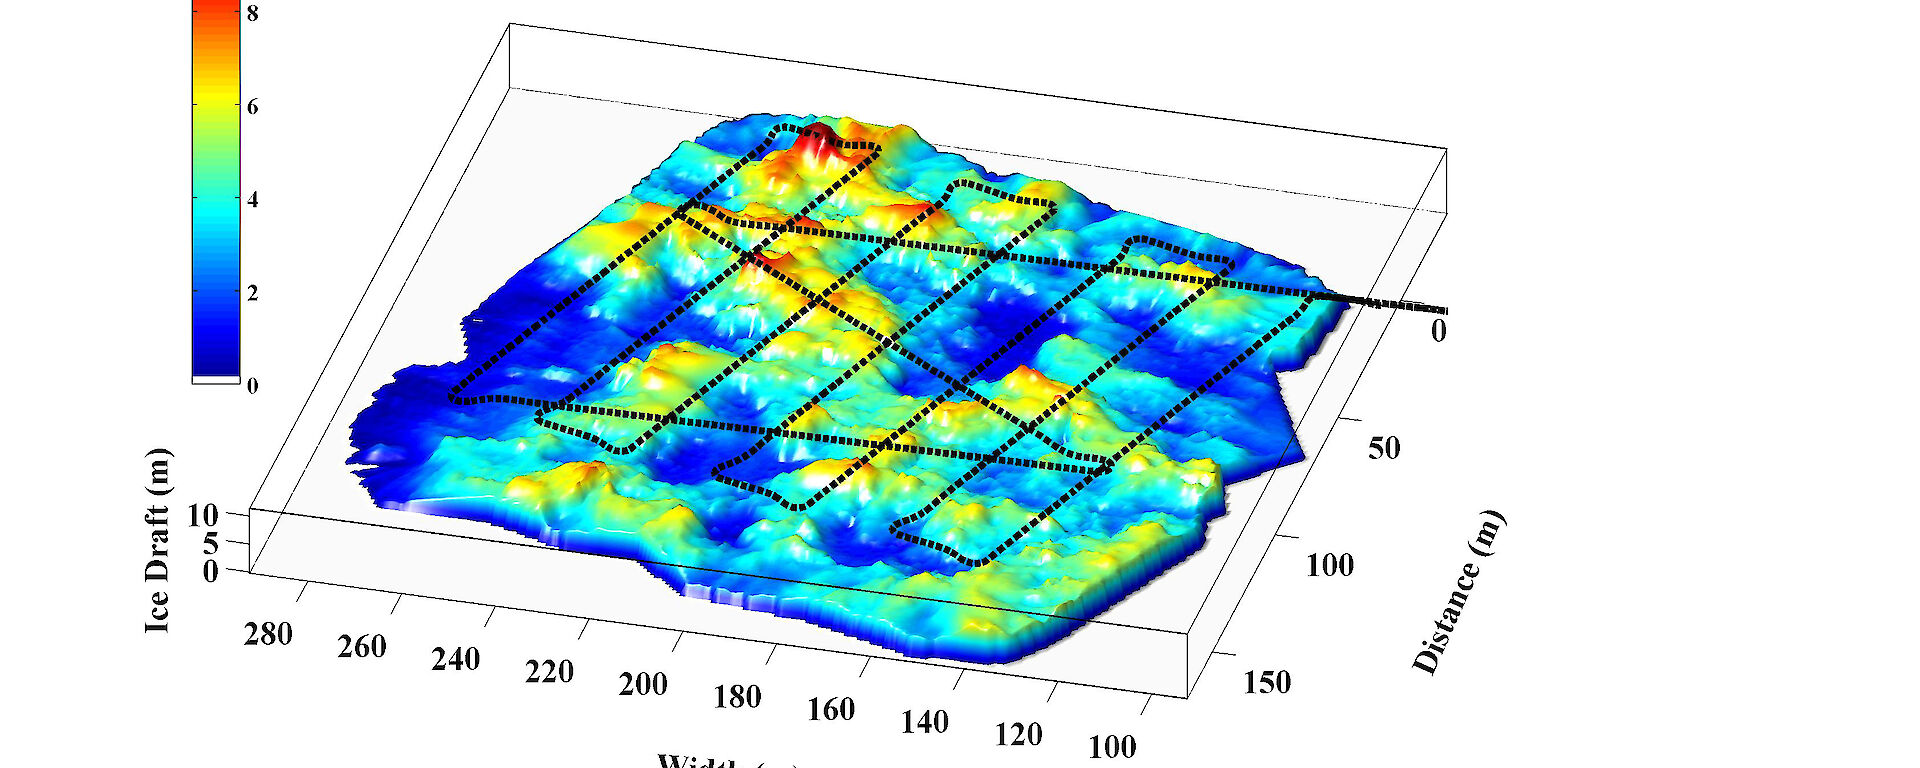 A preliminary 3-D map produced from multibeam sonar data collected by the AUV under an ice floe on 4 October 2012. The map shows a typical ‘lawnmower’ grid of about 150 x 150m and the depth bar on the left shows deeper ice in red (up to about 10m below the surface) and shallower ice in blue (Image: AUV team)